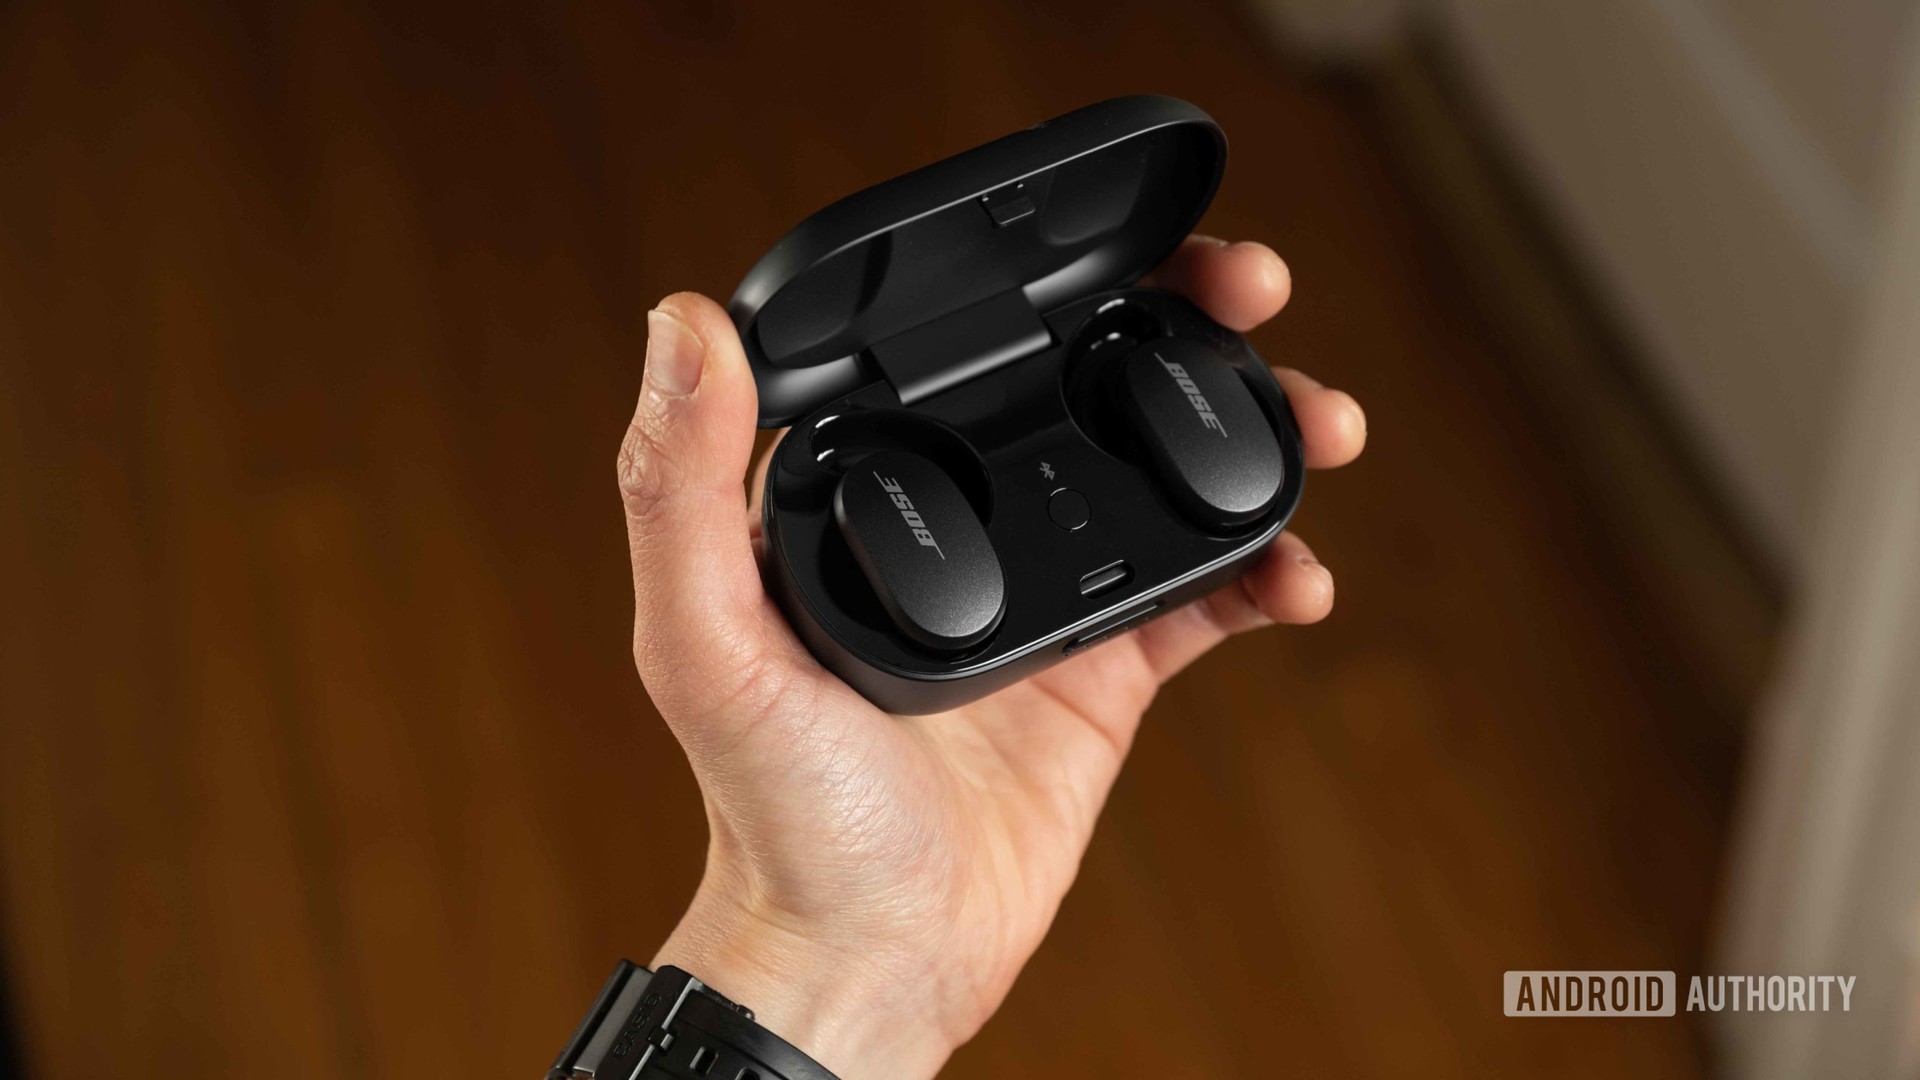 A hand holds the Bose QuietComfort Earbuds noise cancelling true wireless earbuds open charging case.